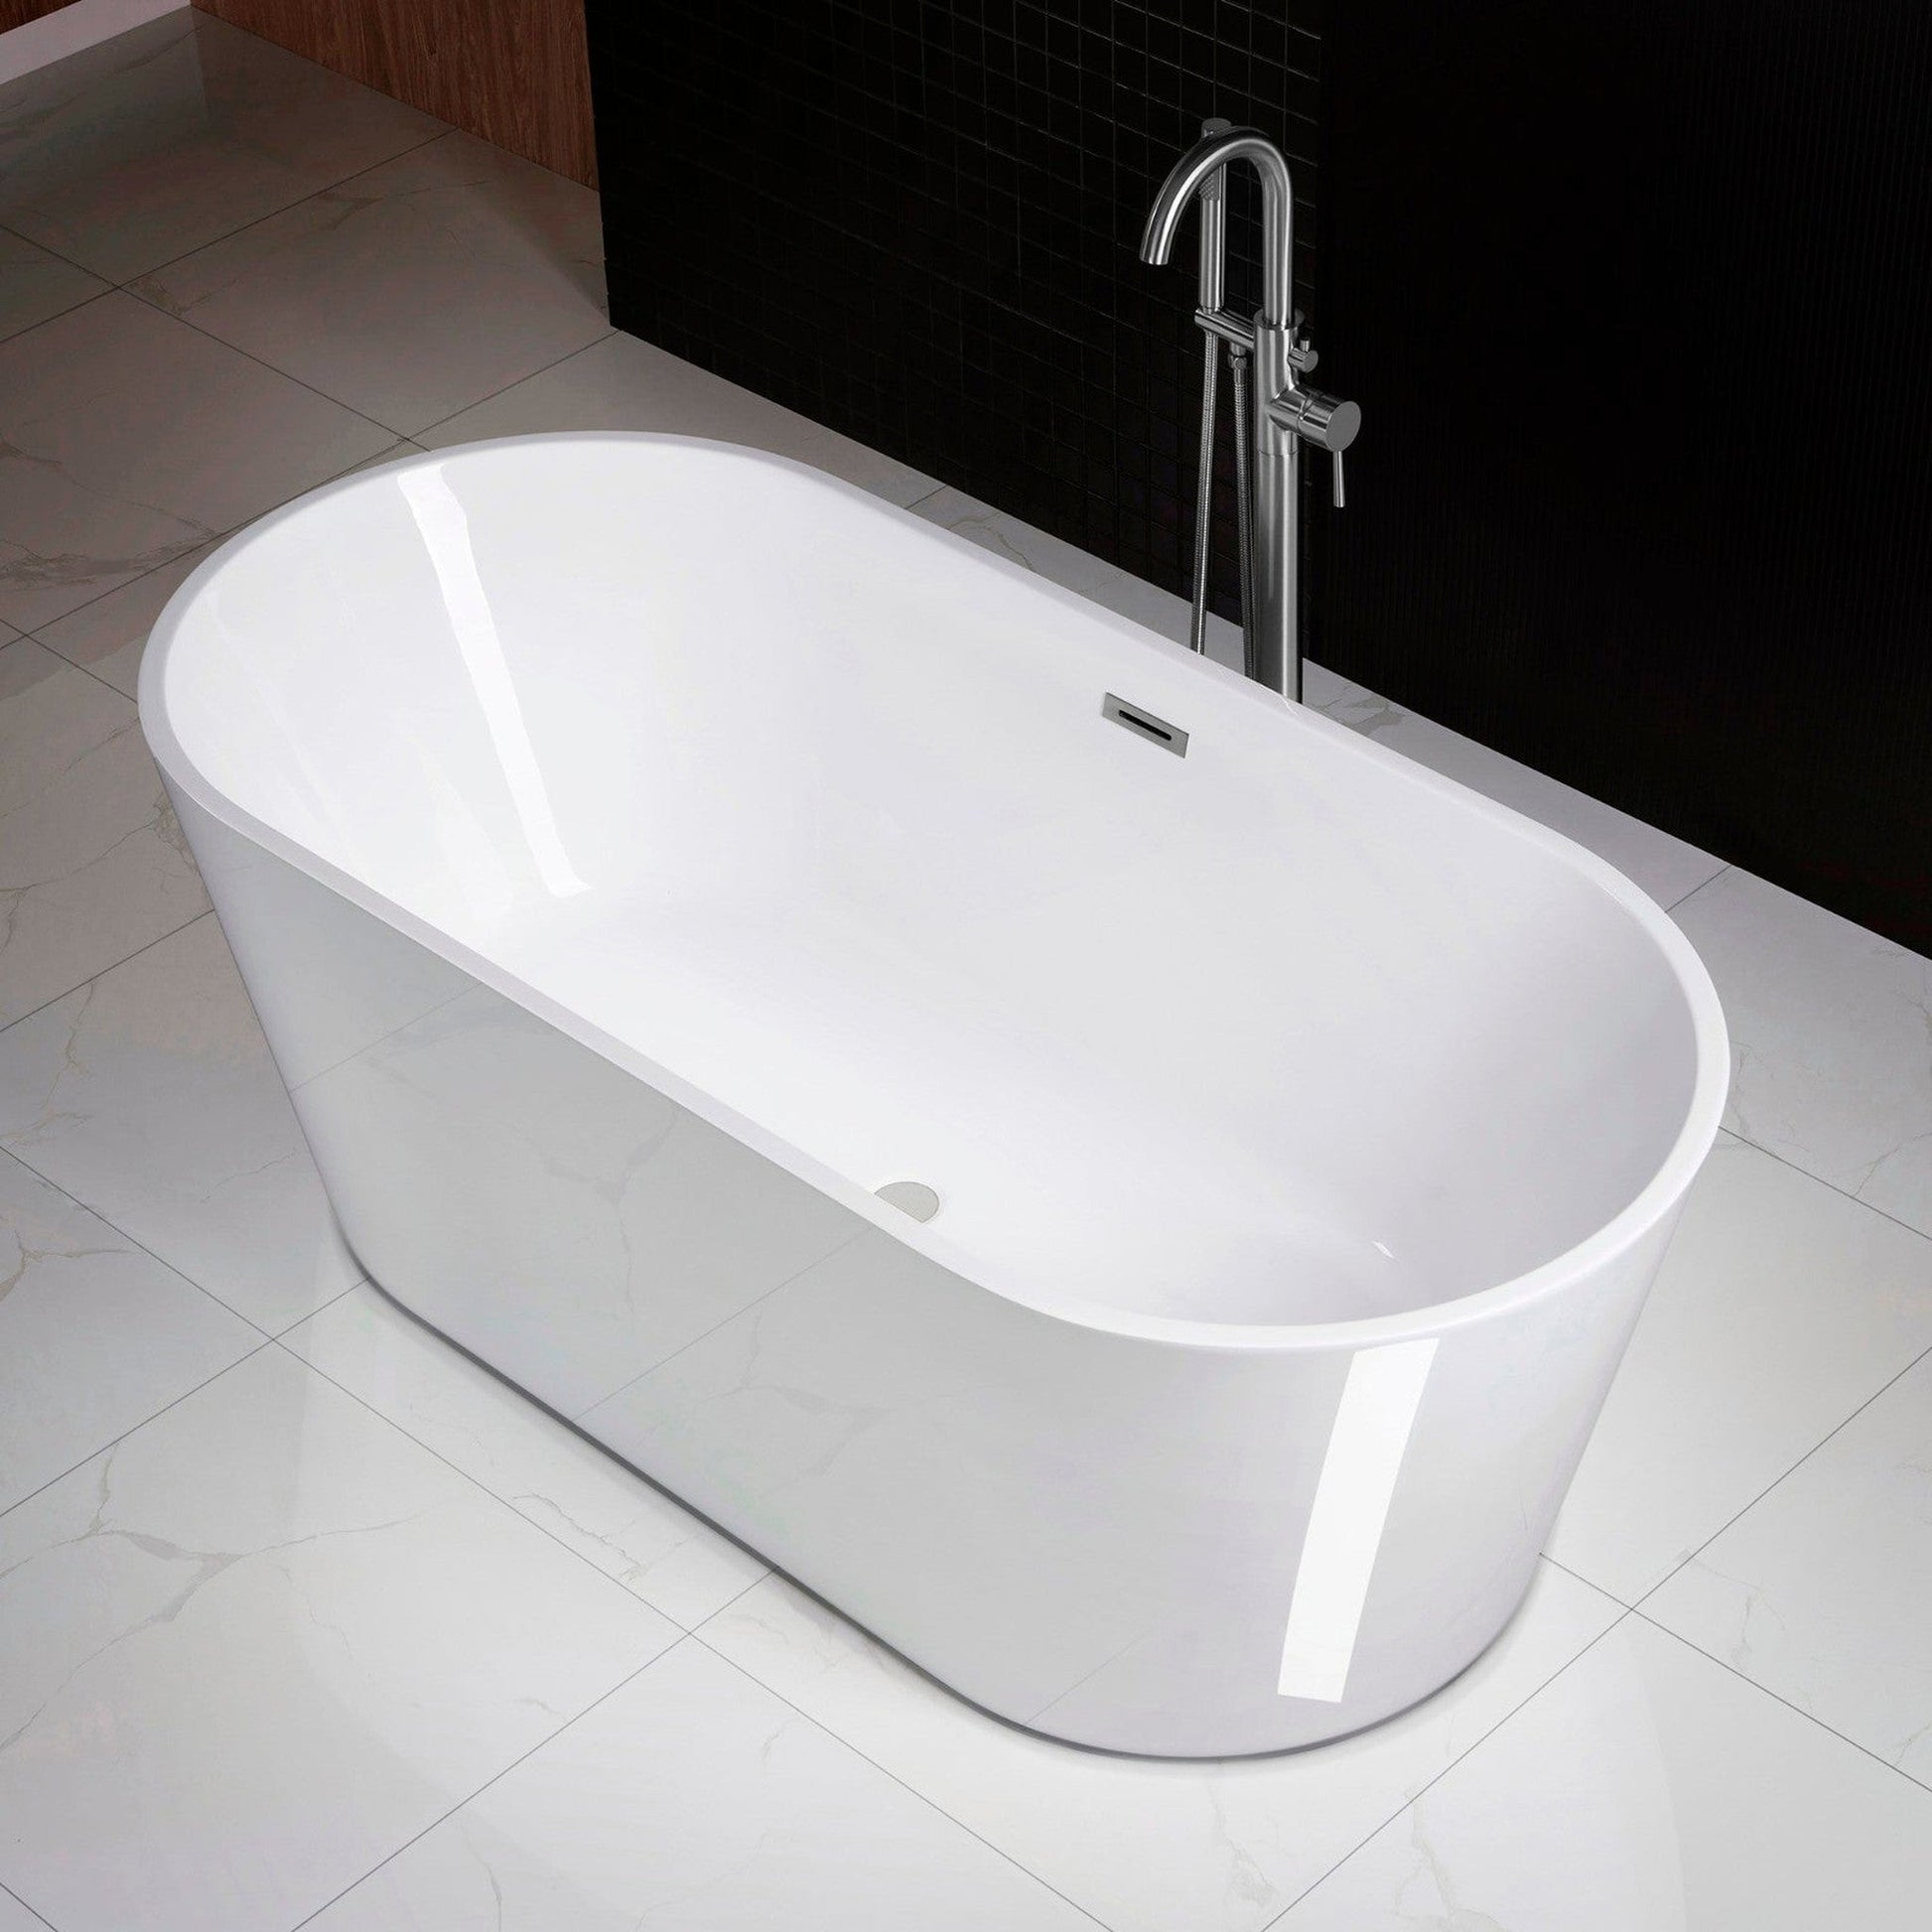 WoodBridge 71" White Acrylic Freestanding Contemporary Soaking Bathtub With Chrome Drain, Overflow, F0024CHSQ Tub Filler and Caddy Tray